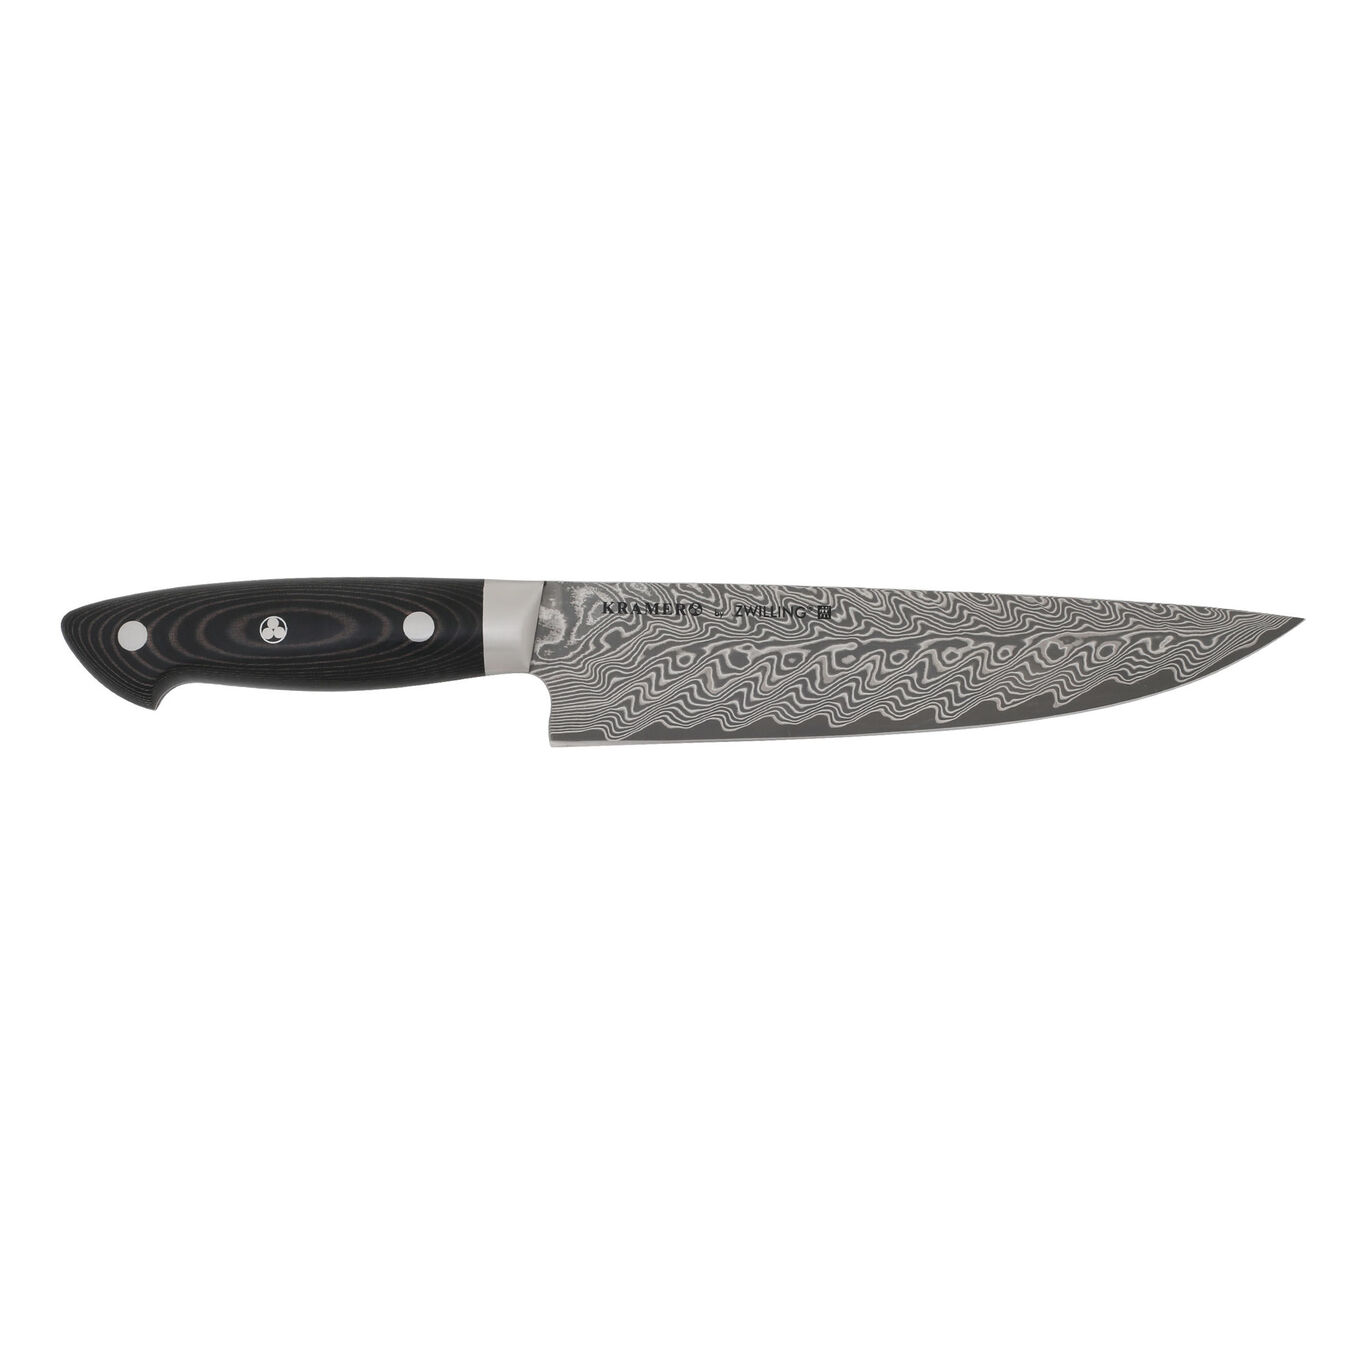 8-inch, Narrow Chef's Knife,,large 3